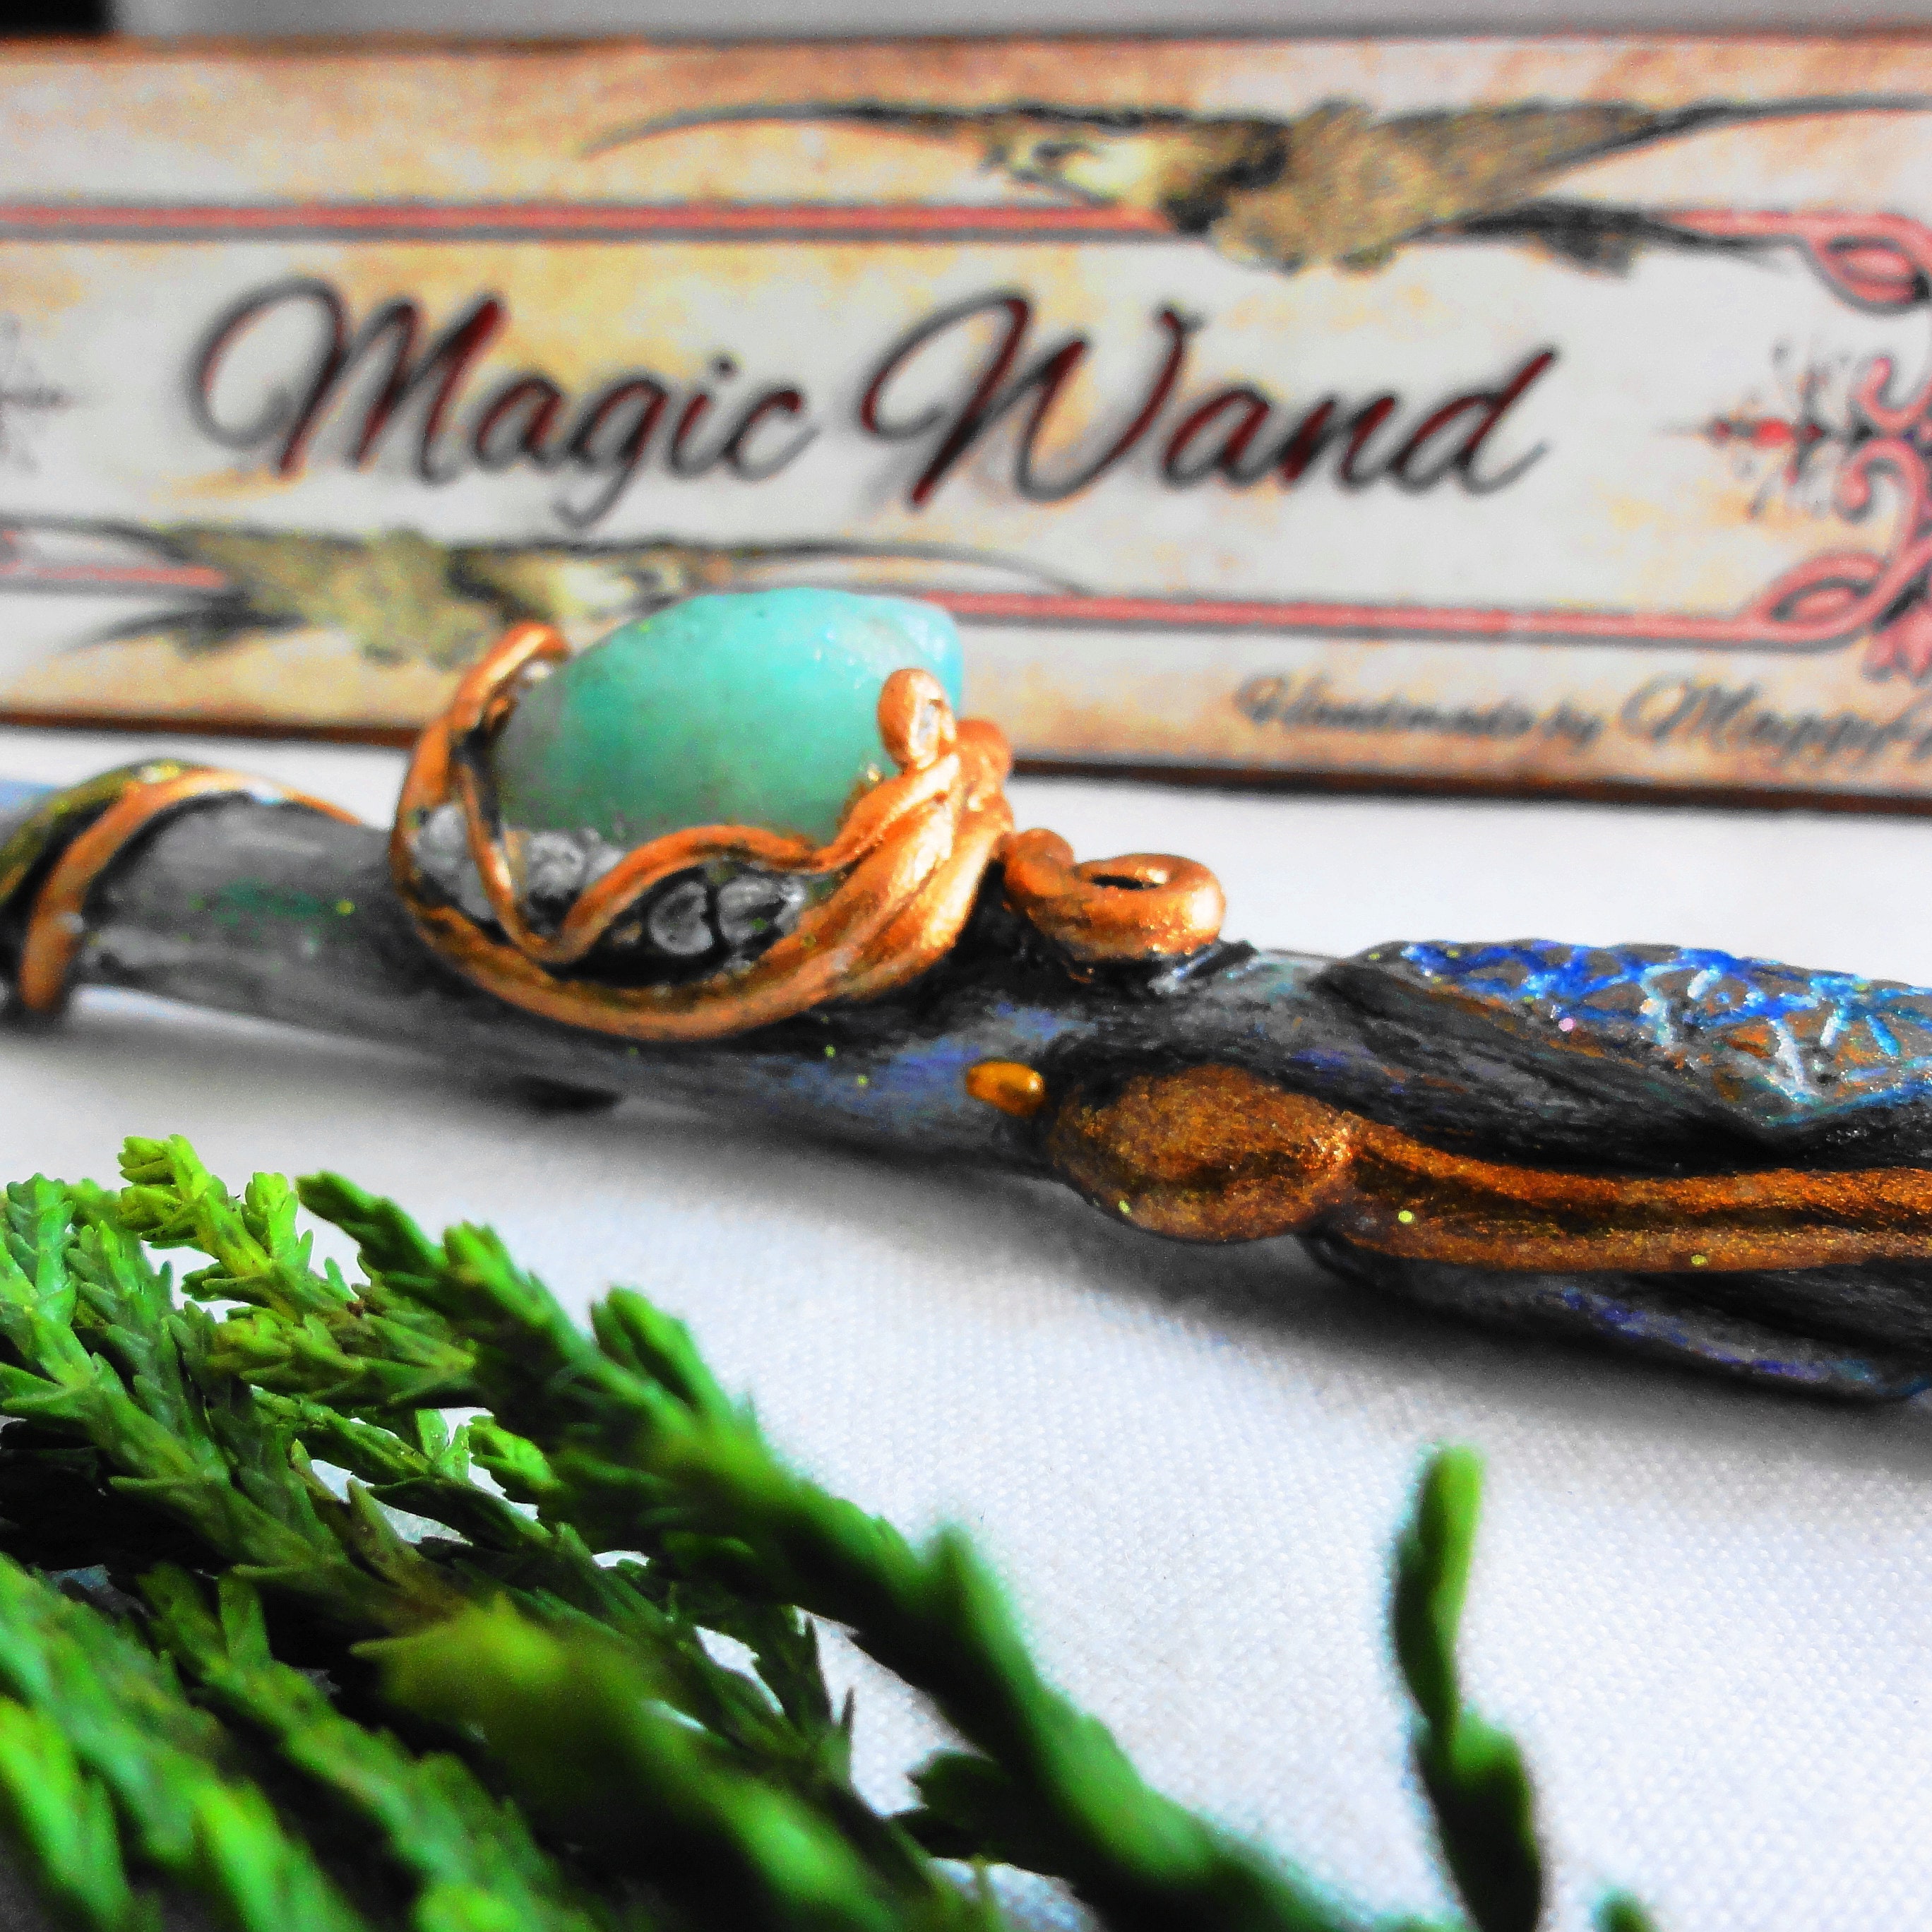 Magic Wand Blue and Gold Cosplay Magic Wand Witches Wand Party Wand Wizard  Tools 